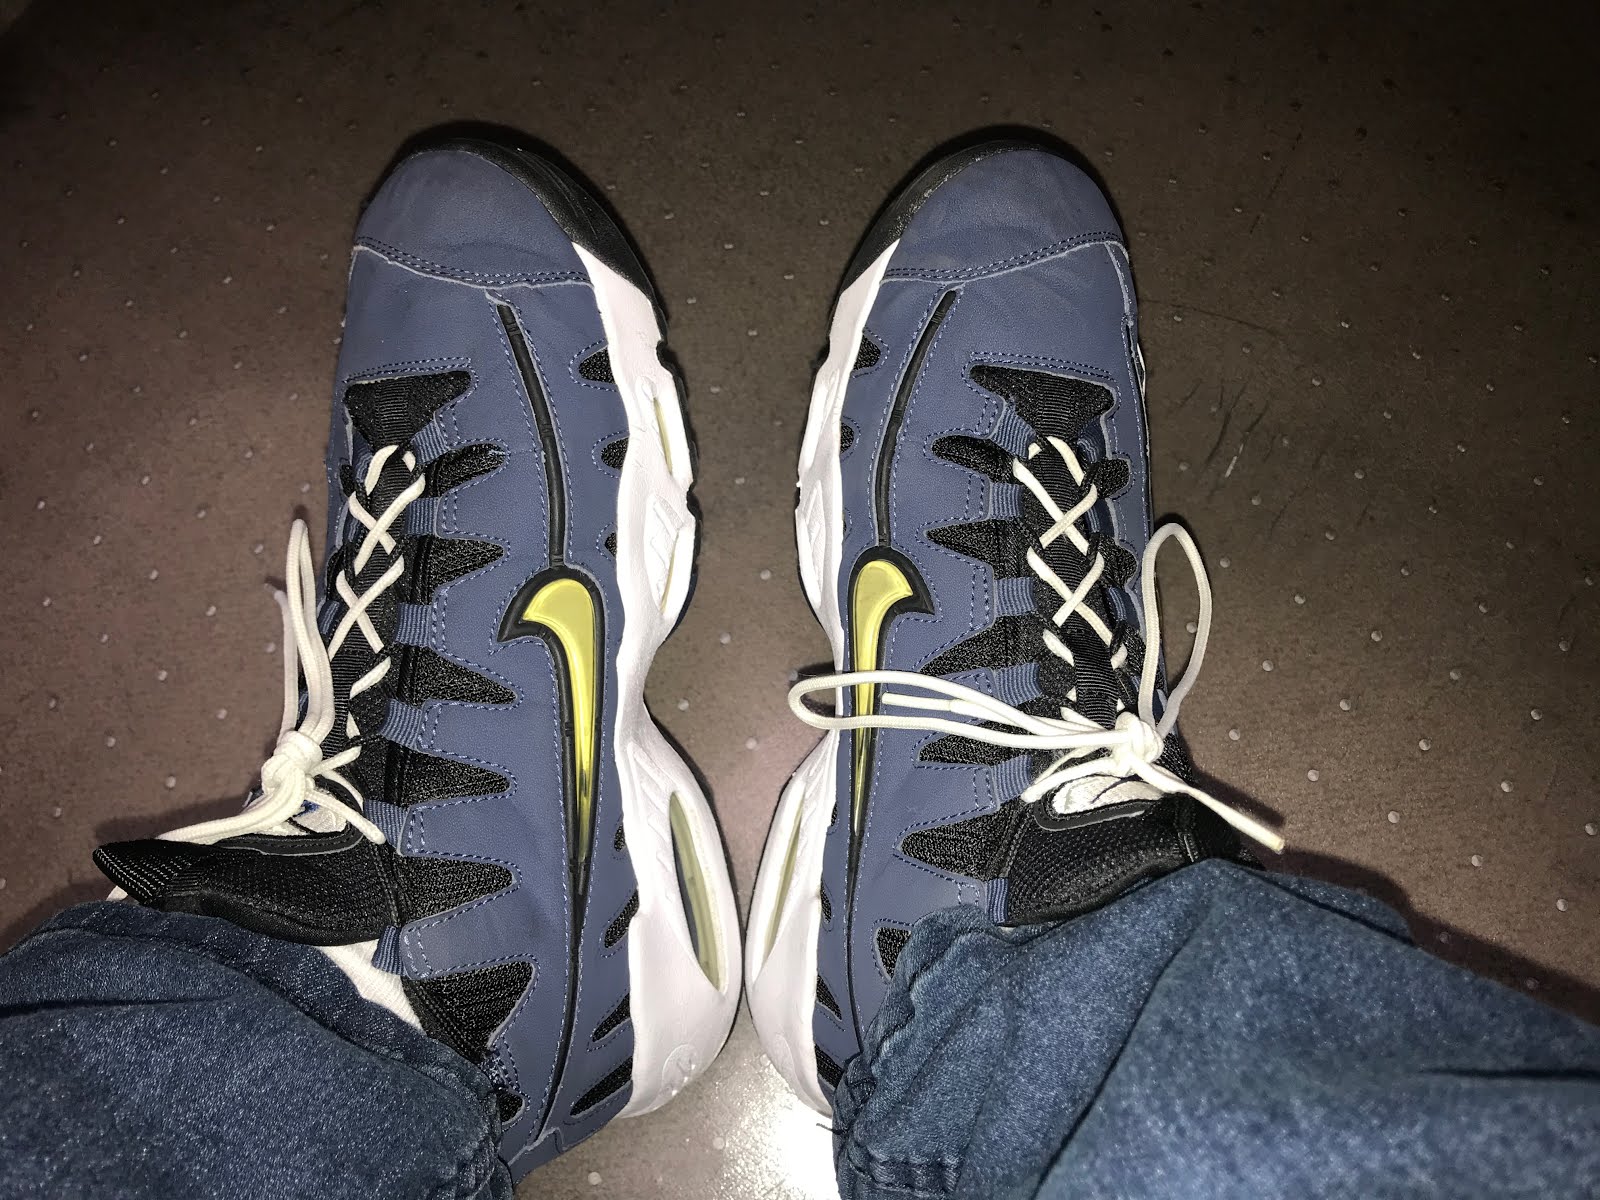 Dodgers Blue Heaven: I Recently Bought some Nomo's -- Nike Air Max NM